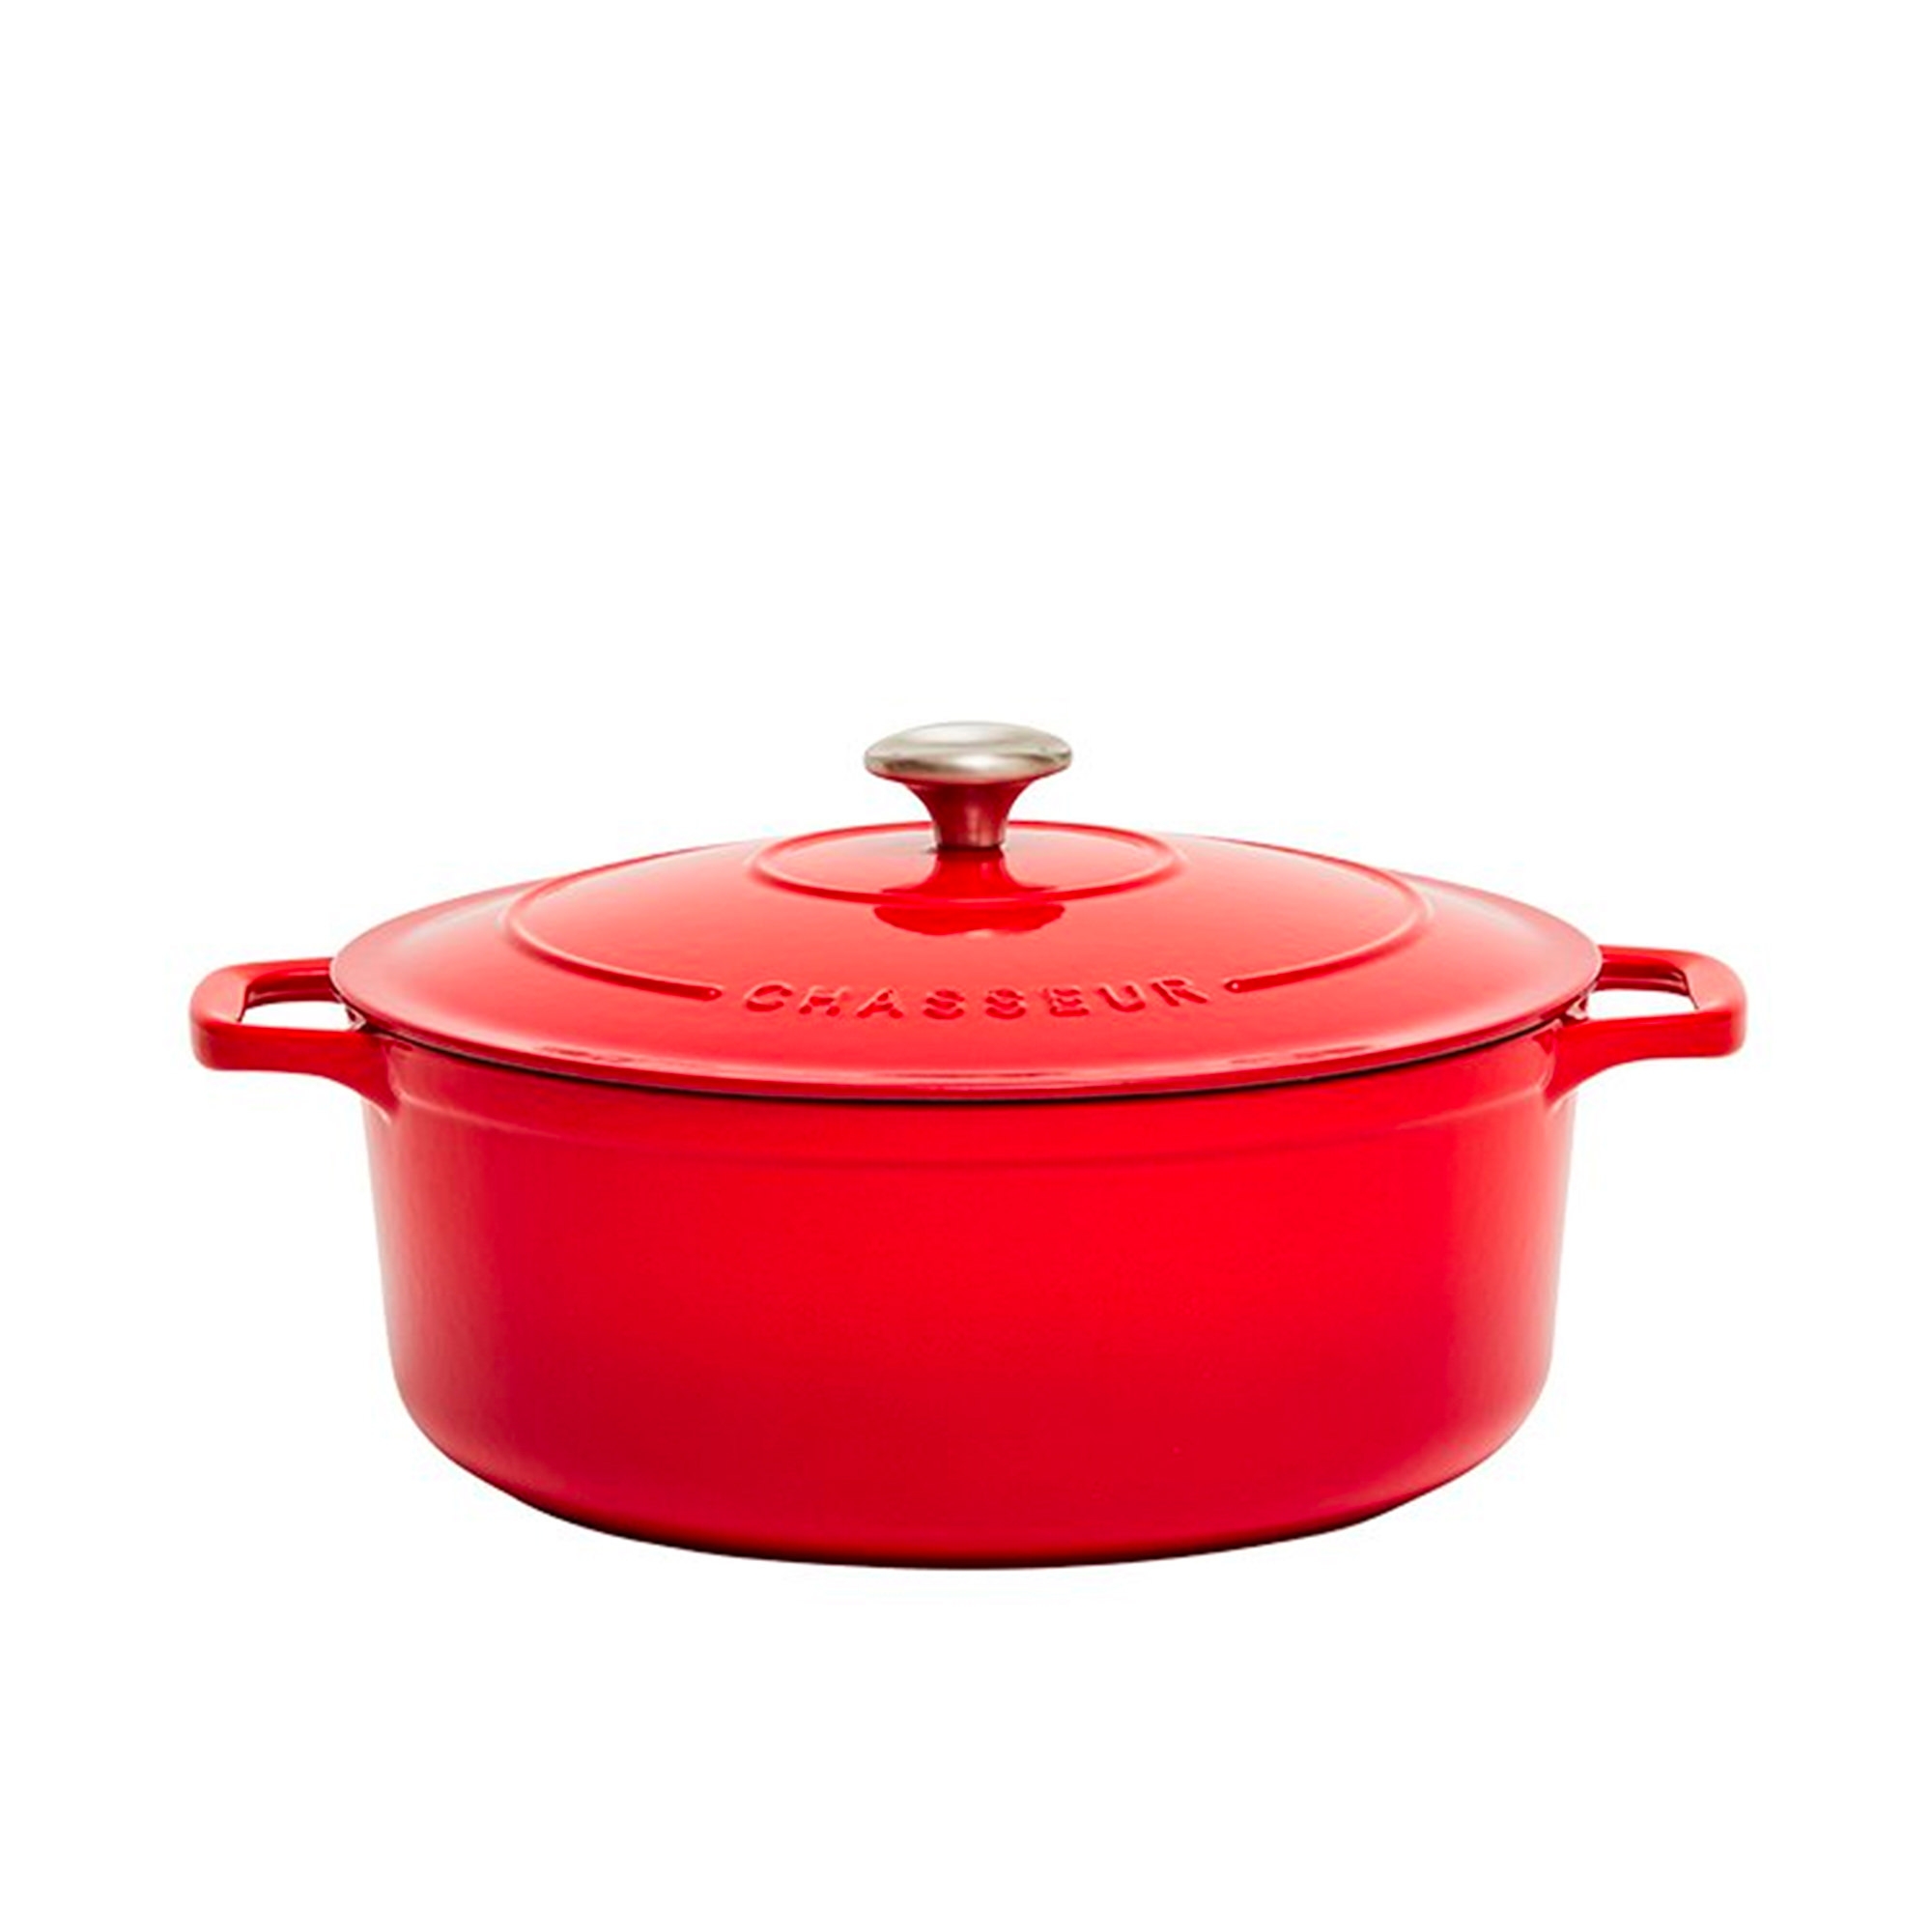 Chasseur Round French Oven 28cm - 6.1L Chilli Red Image 1